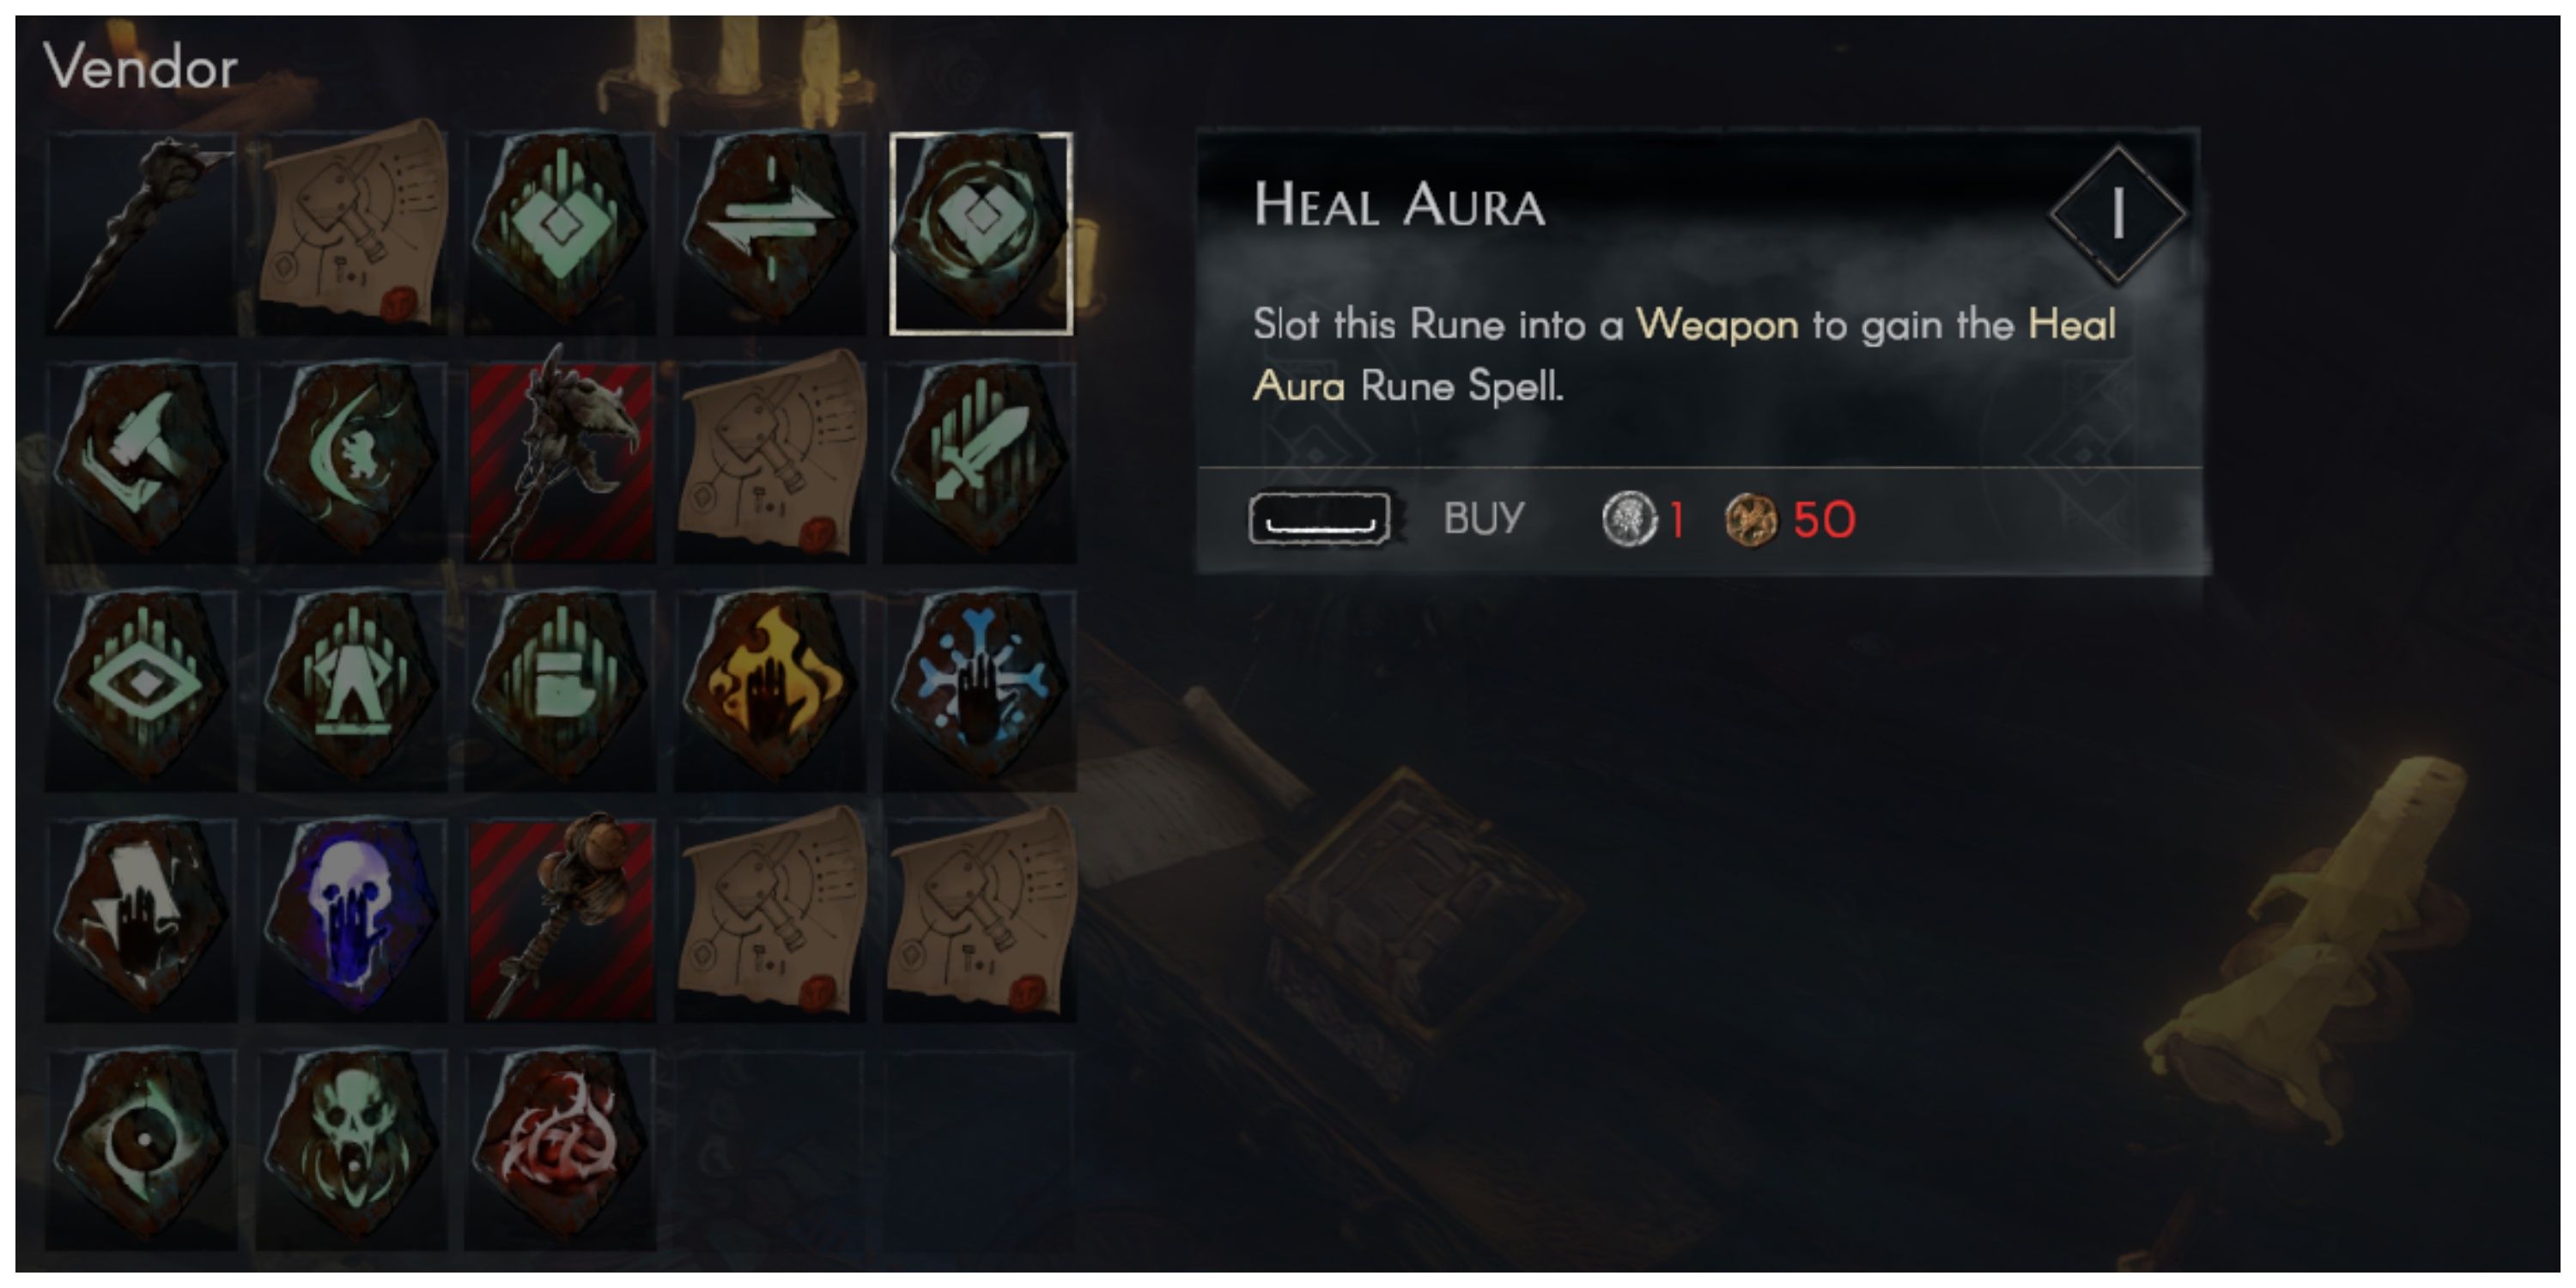 No Rest For The Wicked - Heal Aura Rune